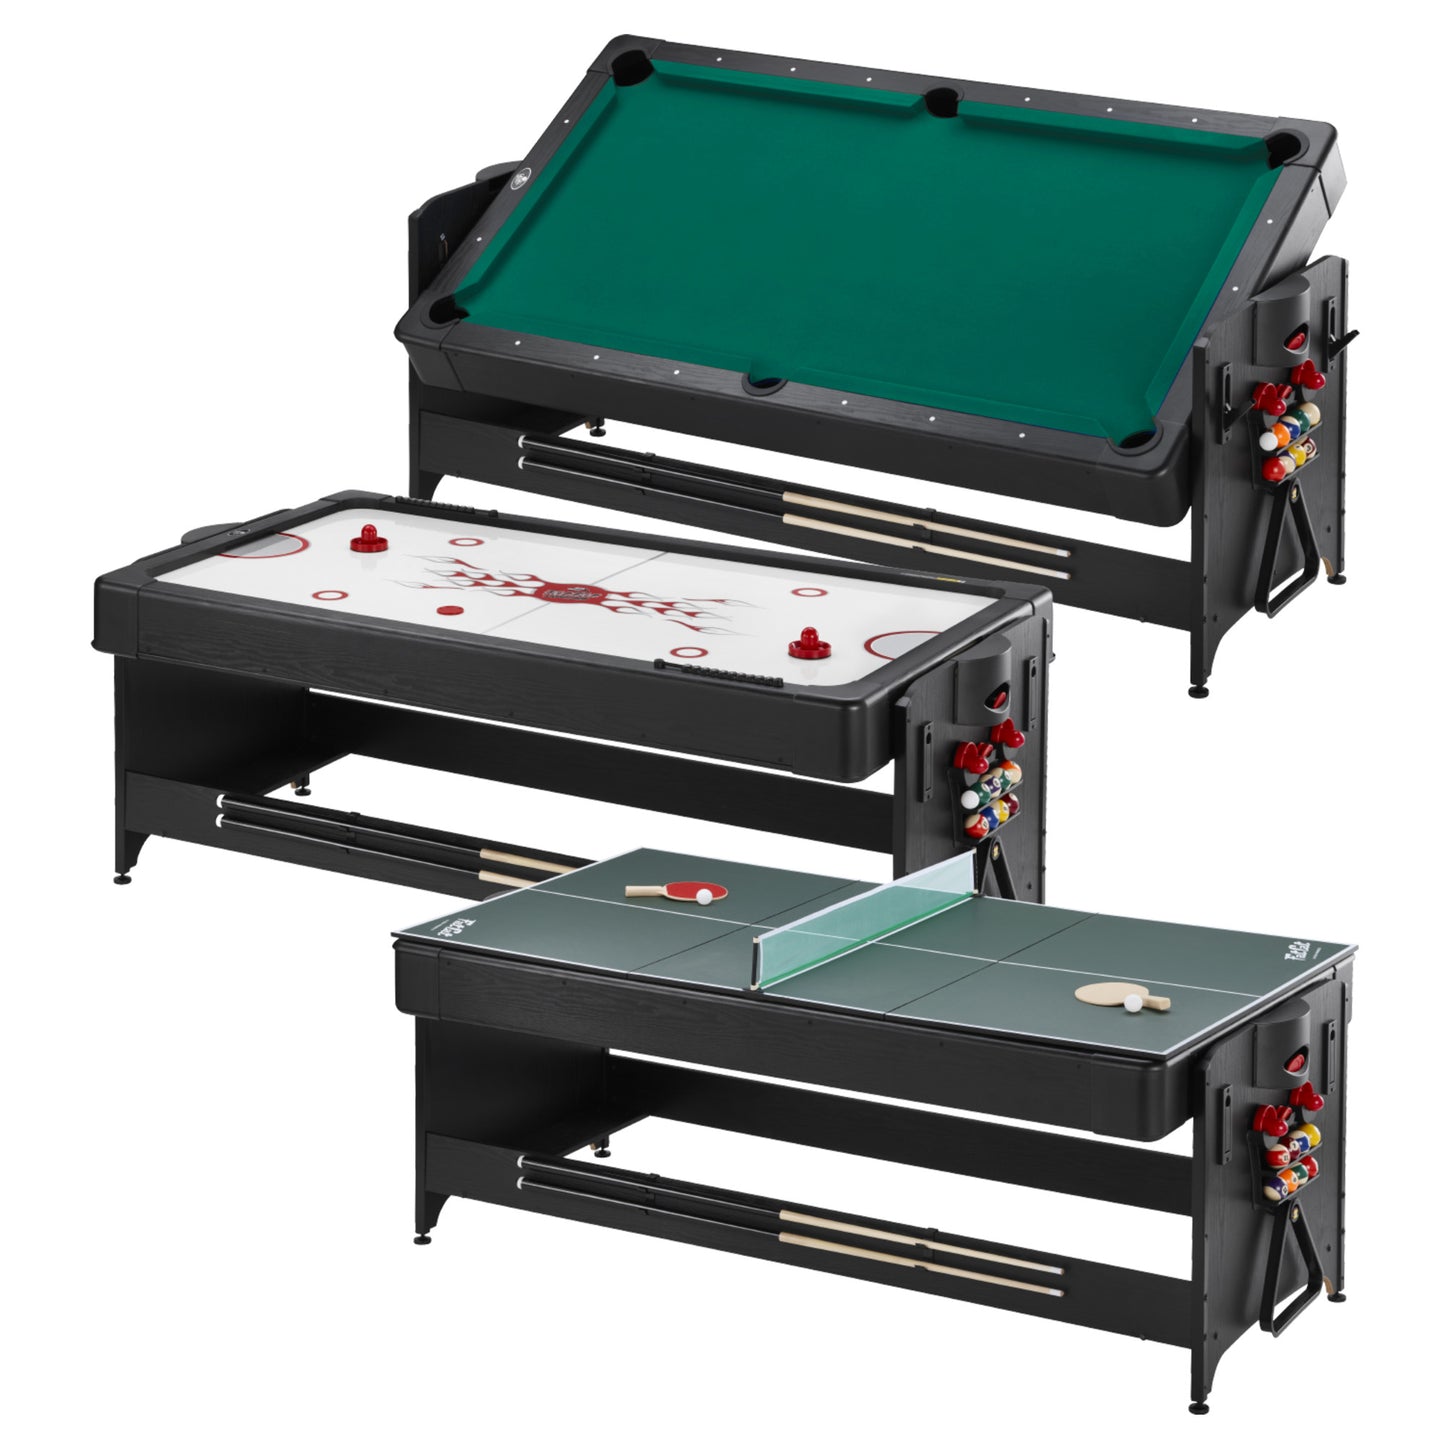 3 Fat Cat Original 3-in-1 Blue 7' Pockey™ Multi-Game Tables showing all of the table settings from billiard to air hockey to ping pong